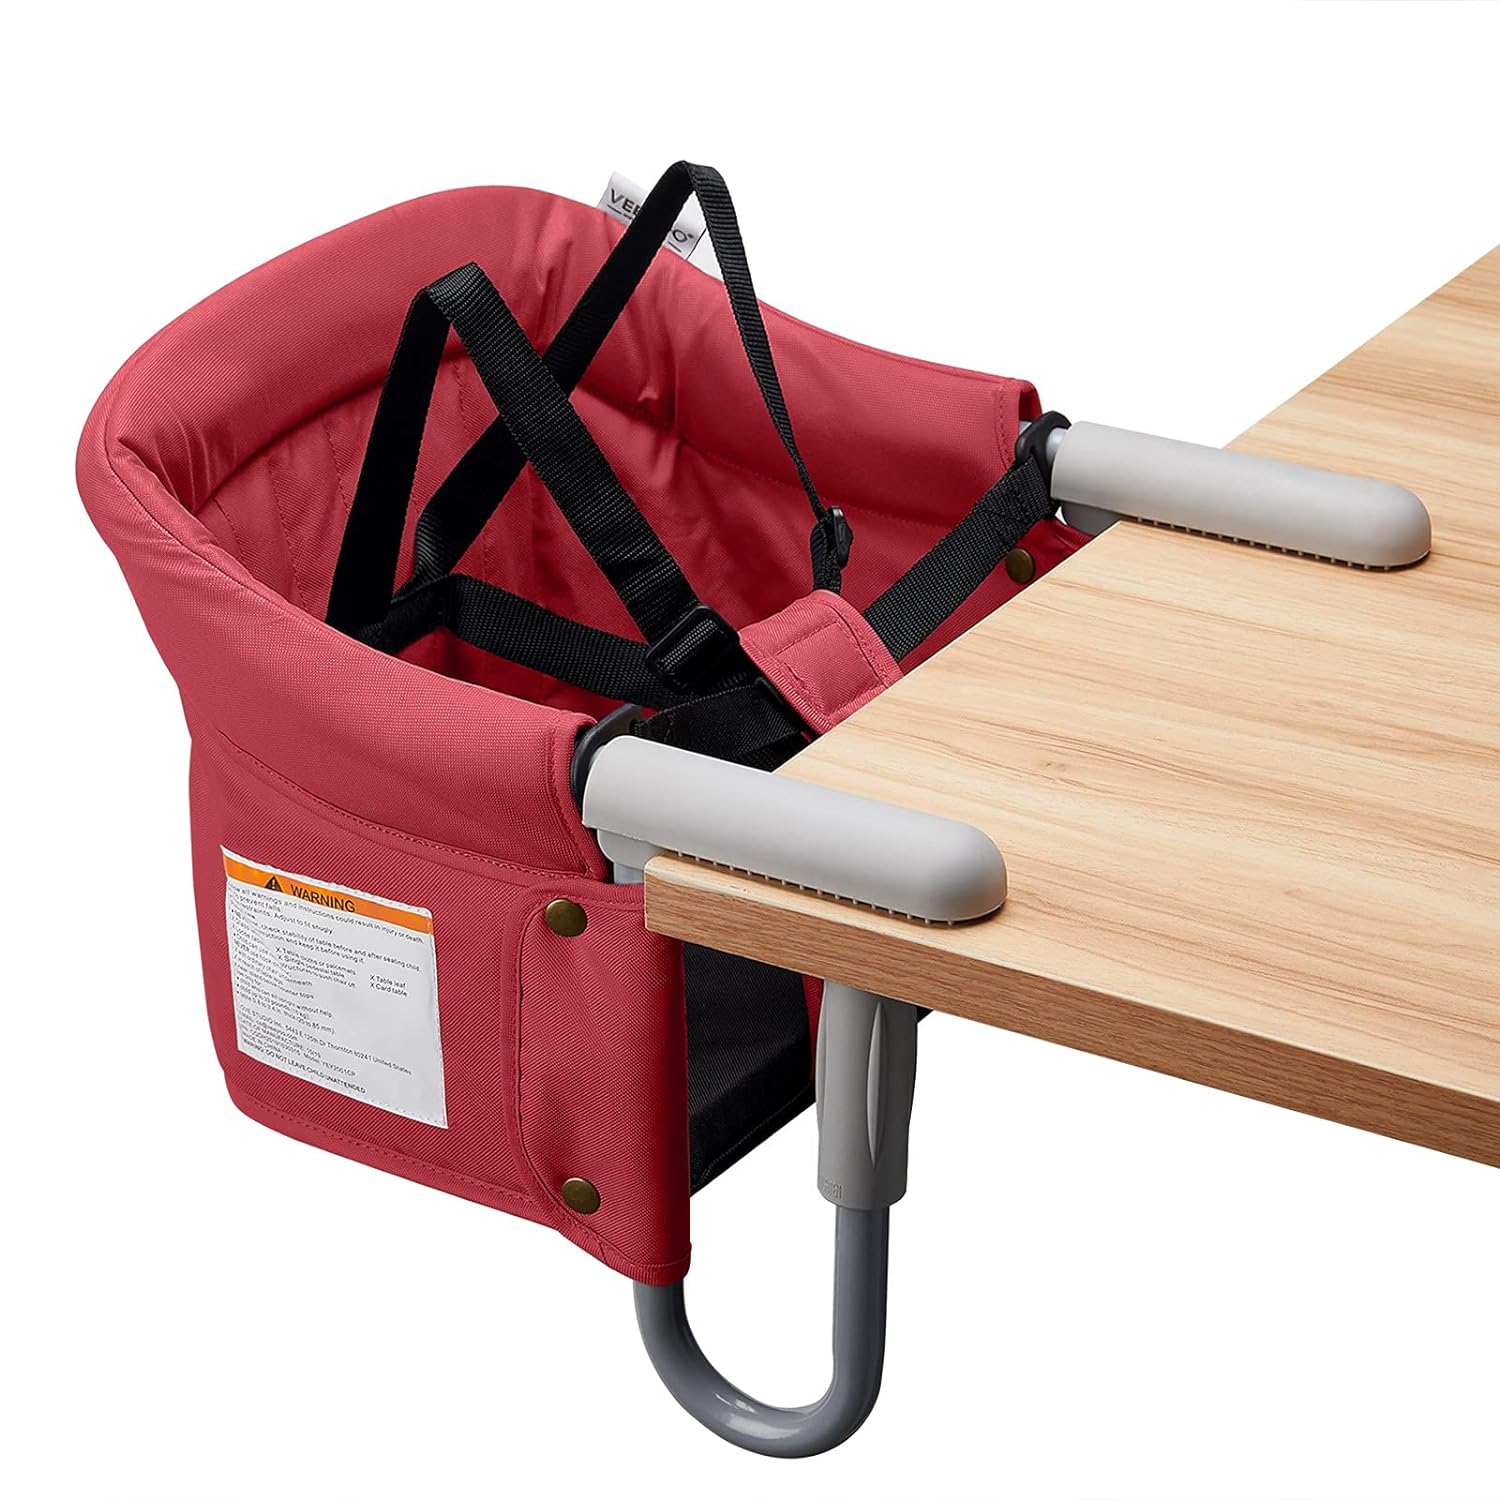 Is This the Most Versatile Booster Seat for Active Families: Introducing the Veeyoo Portable High Chair